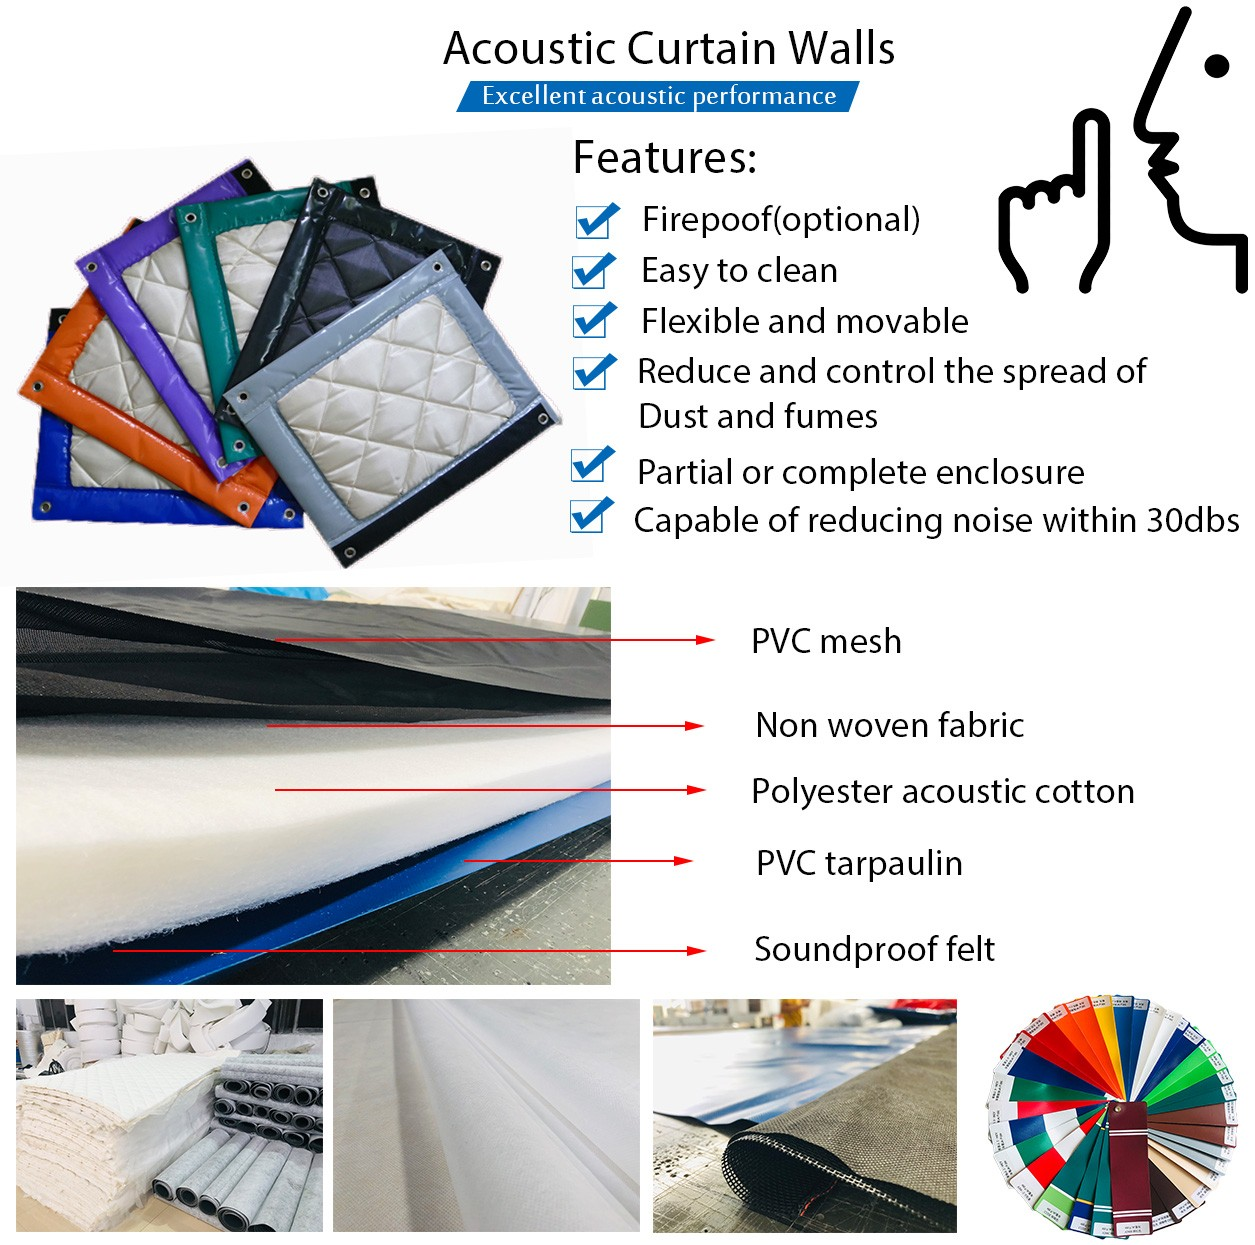 Acoustic curtain walls